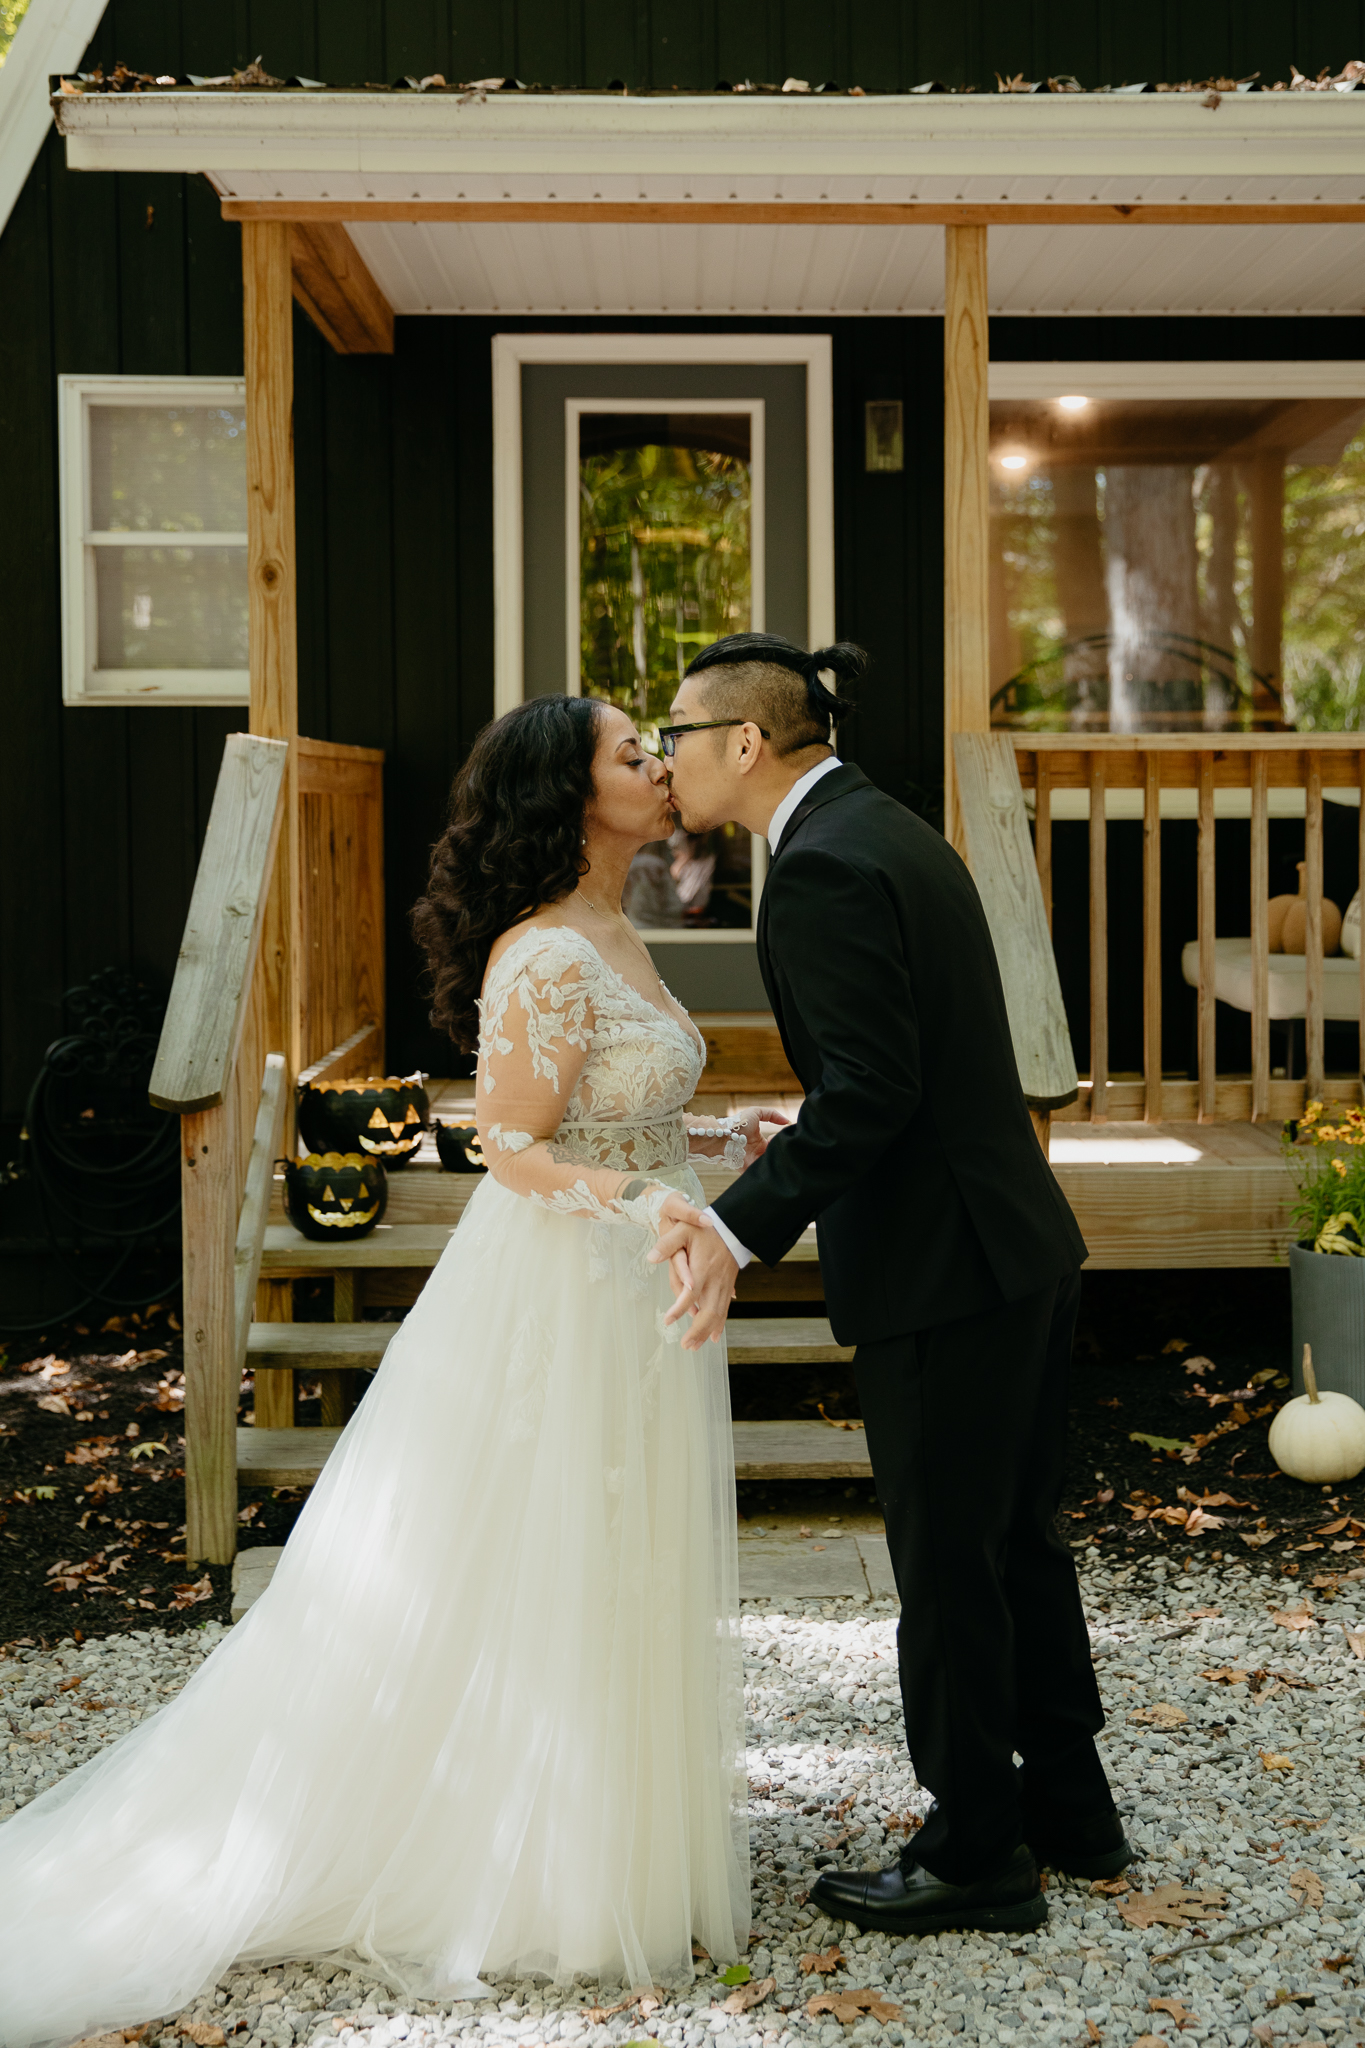 Indiana Brown County Elopement // First look with an A-frame Cabin